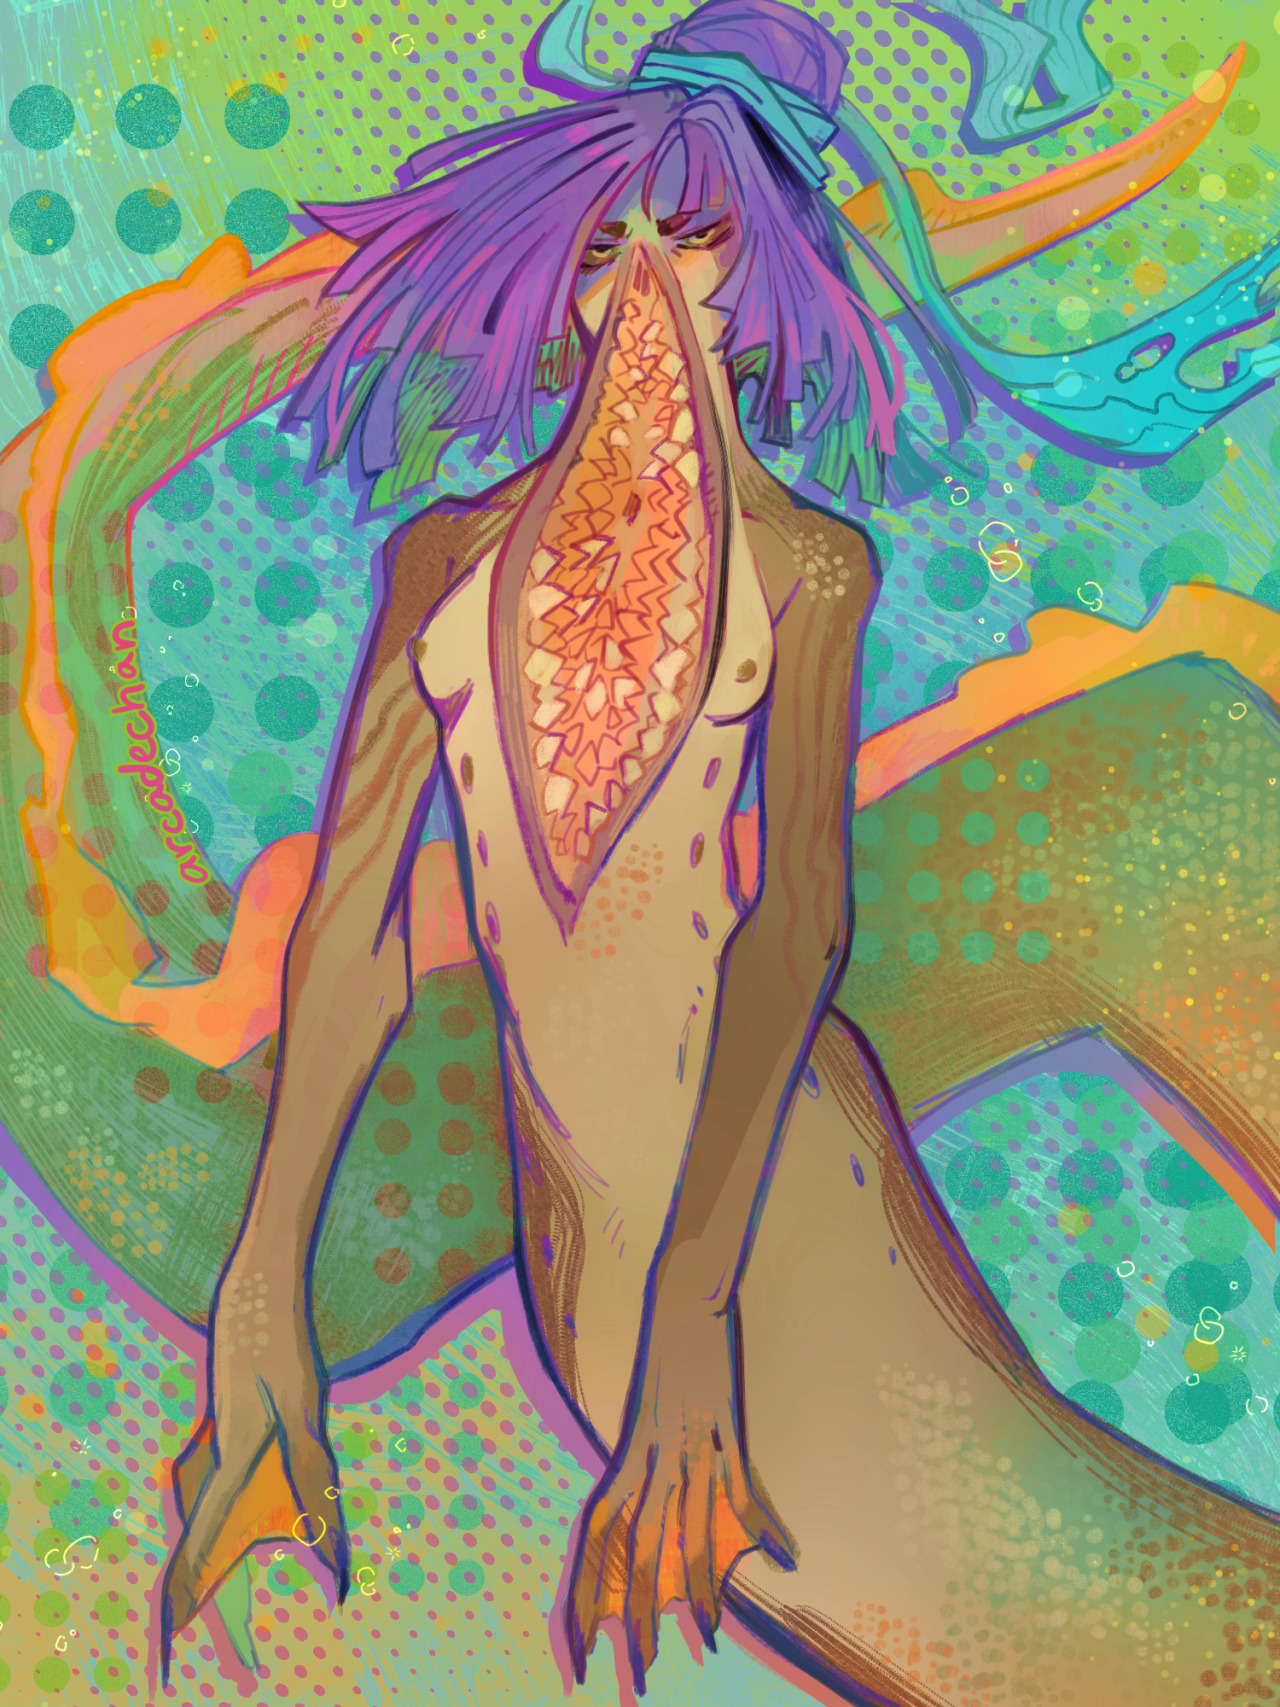 a drawing of a lamprey eel mermaid. She has a large mouth, stretching from her face down to her torso, with several rows of sharp teeth. She has purple hair, tied up with a blue ribbon in a bun. Her eyes are serious looking, with dark sclera and a bright iris. She has orange webbing between her fingers, and her long eel tail extends behind her. She looks like she could be irritated.